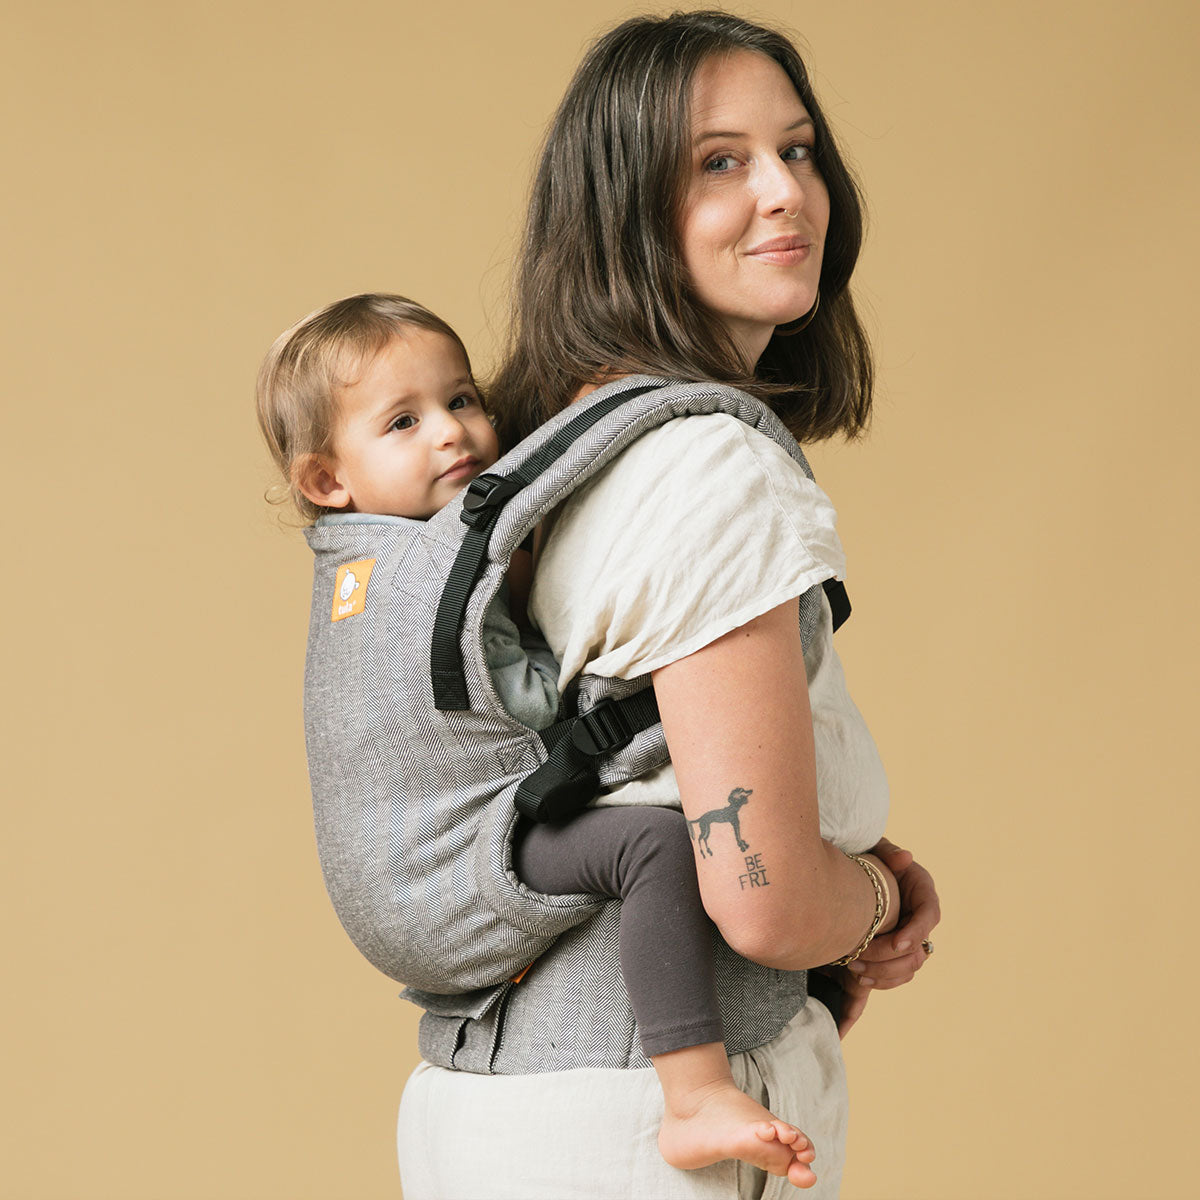 Mum babywearing her child on her back in Tula Free-to-Grow carrier